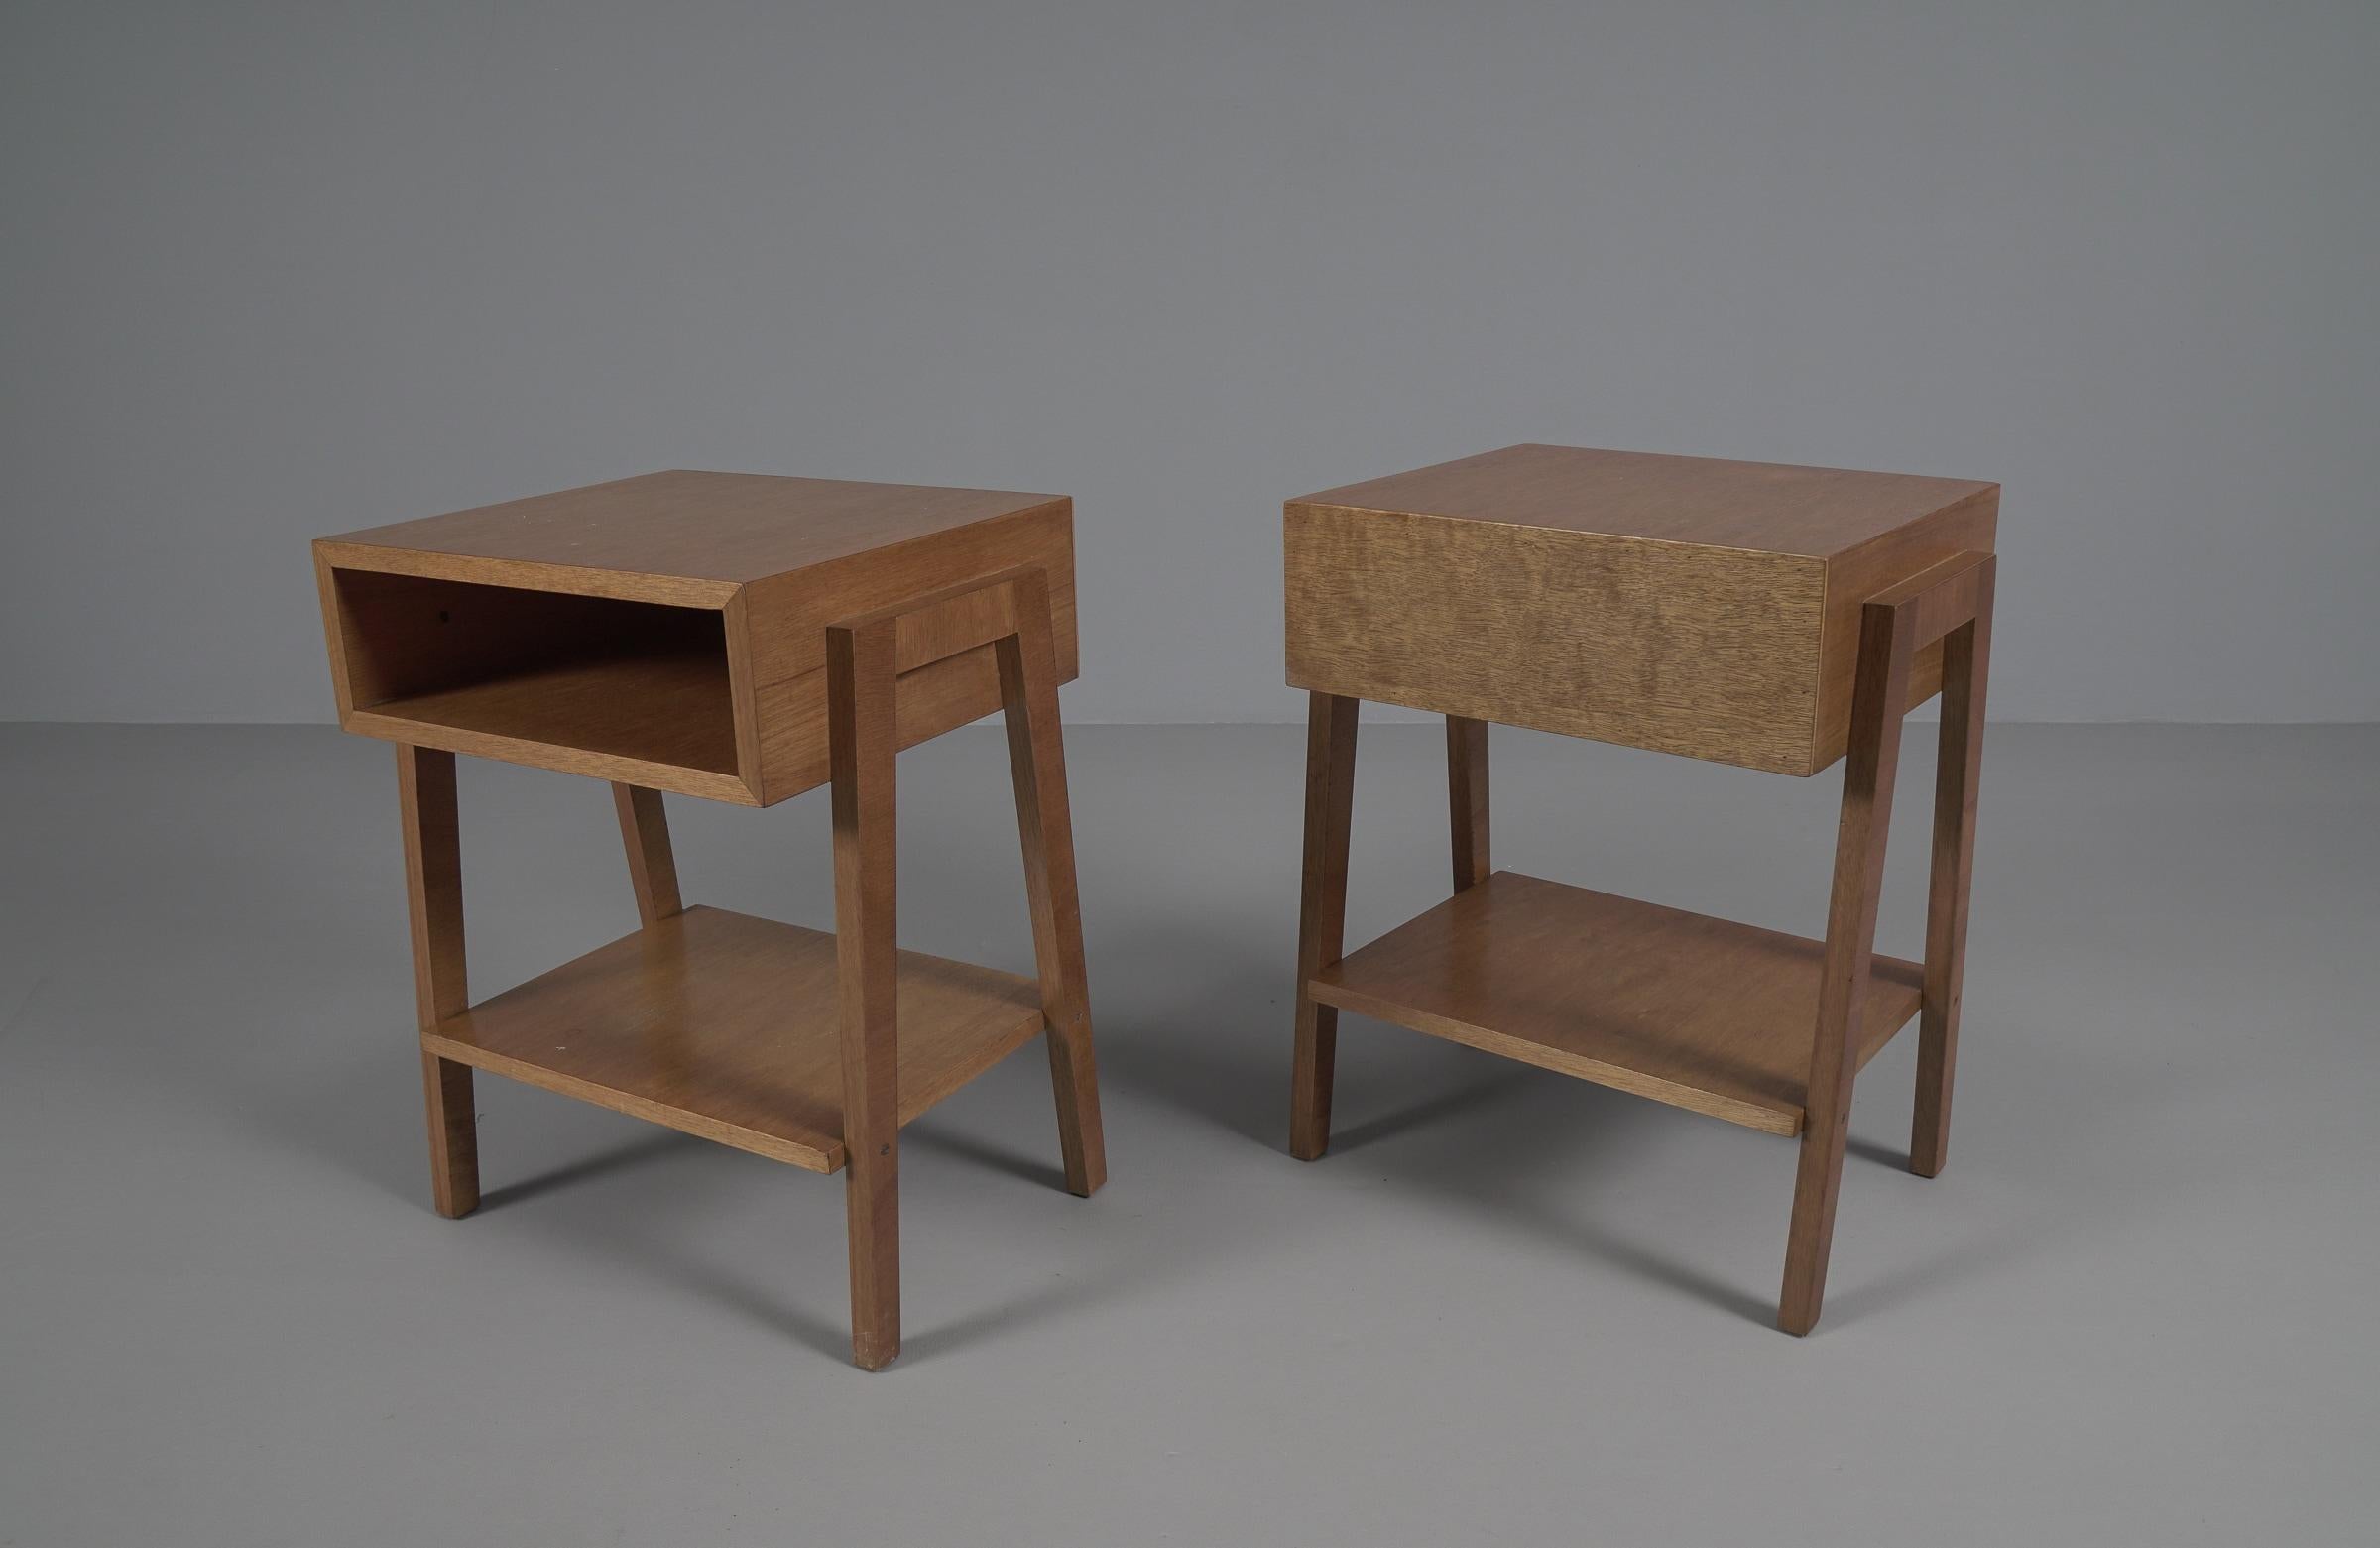  Pair of Minimalistic Mid-Century Modern Wooden Nightstands, Italy 1950s For Sale 3